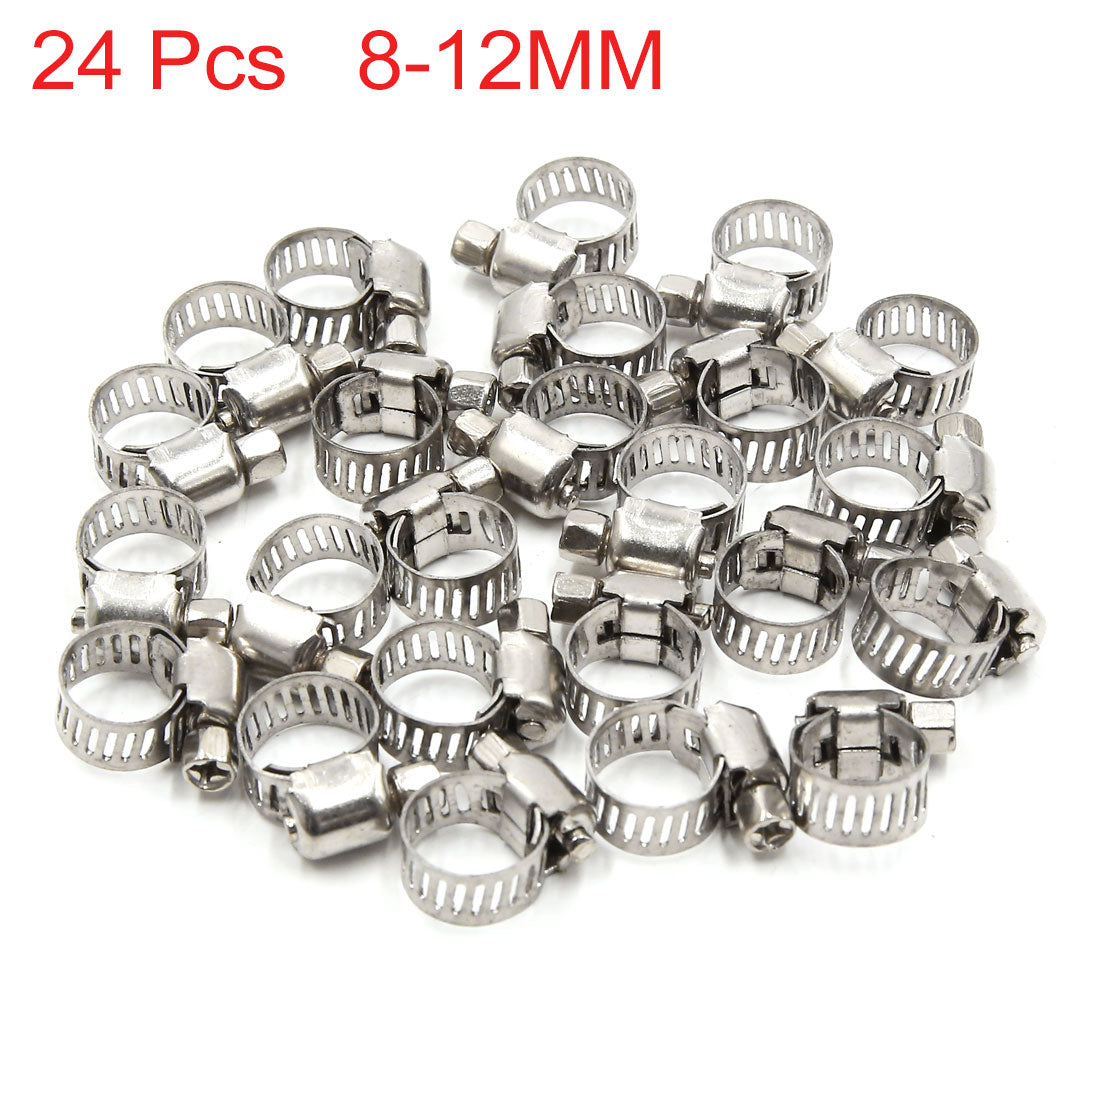 uxcell Uxcell 24pcs 8-12MM Stainless Steel Car Vehicle Drive Hose Clamp Fuel Line  Clip